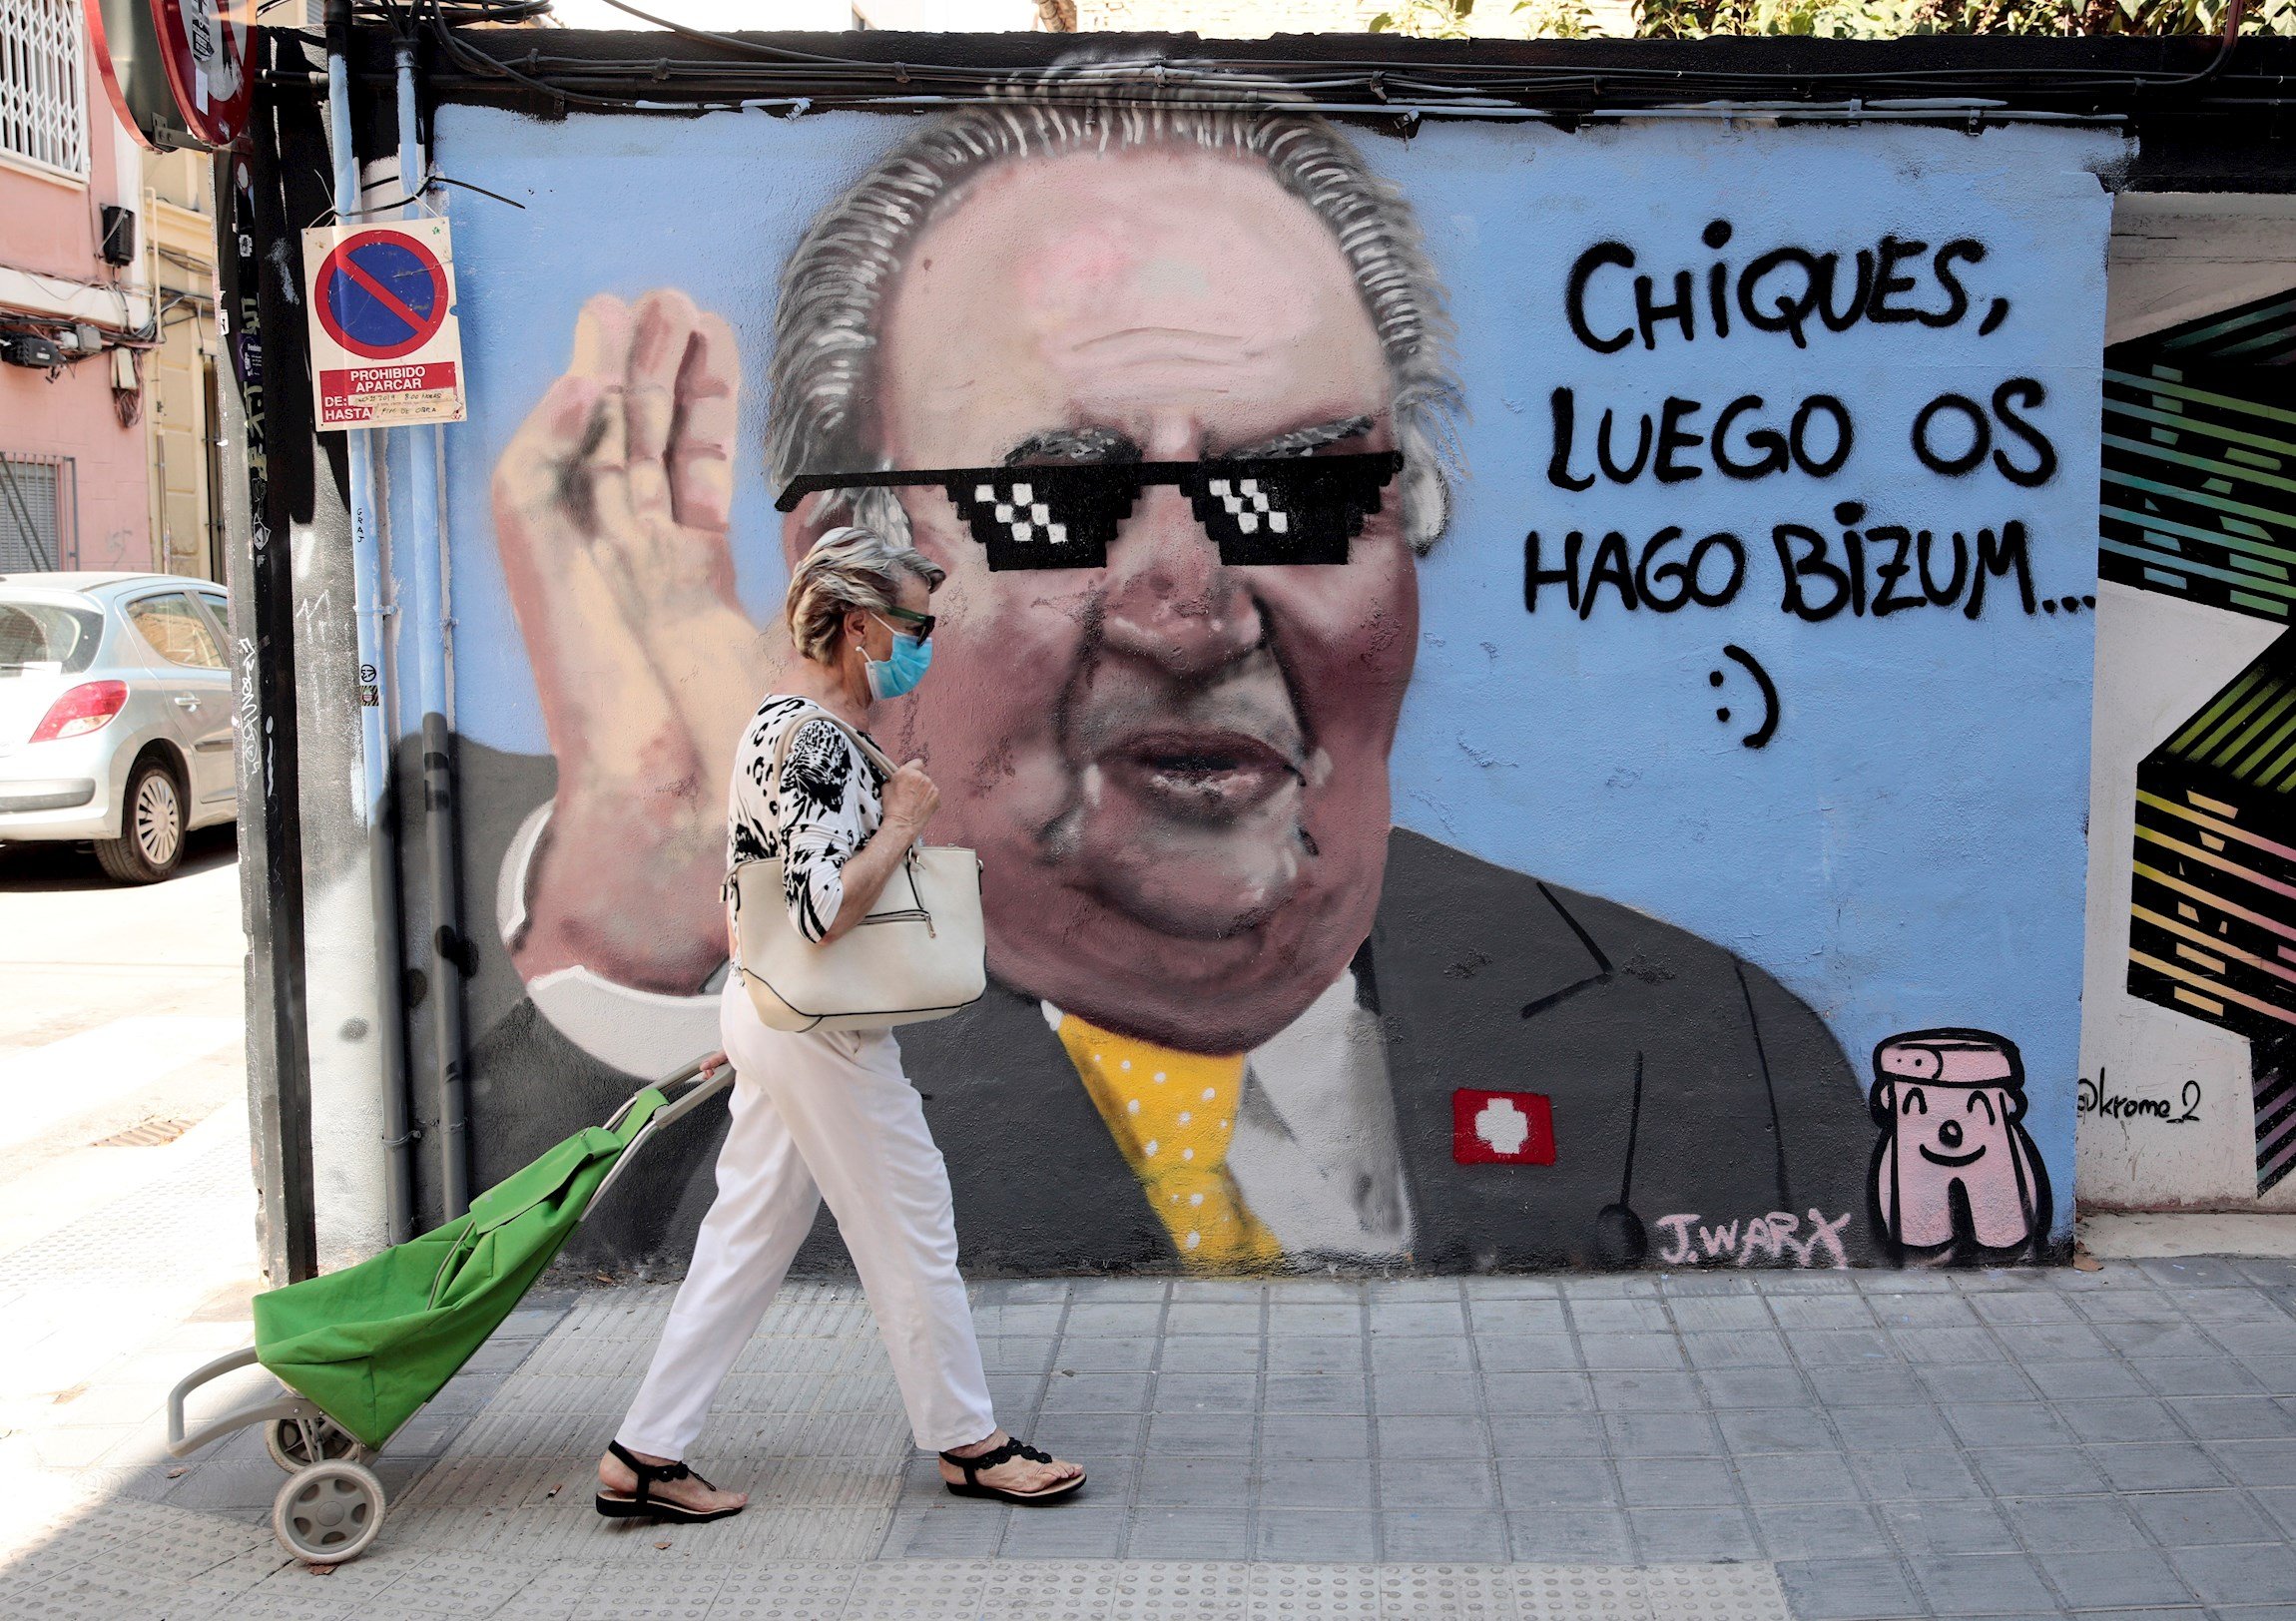 Juan Carlos I left Spain for Abu Dhabi hours before his exile was announced